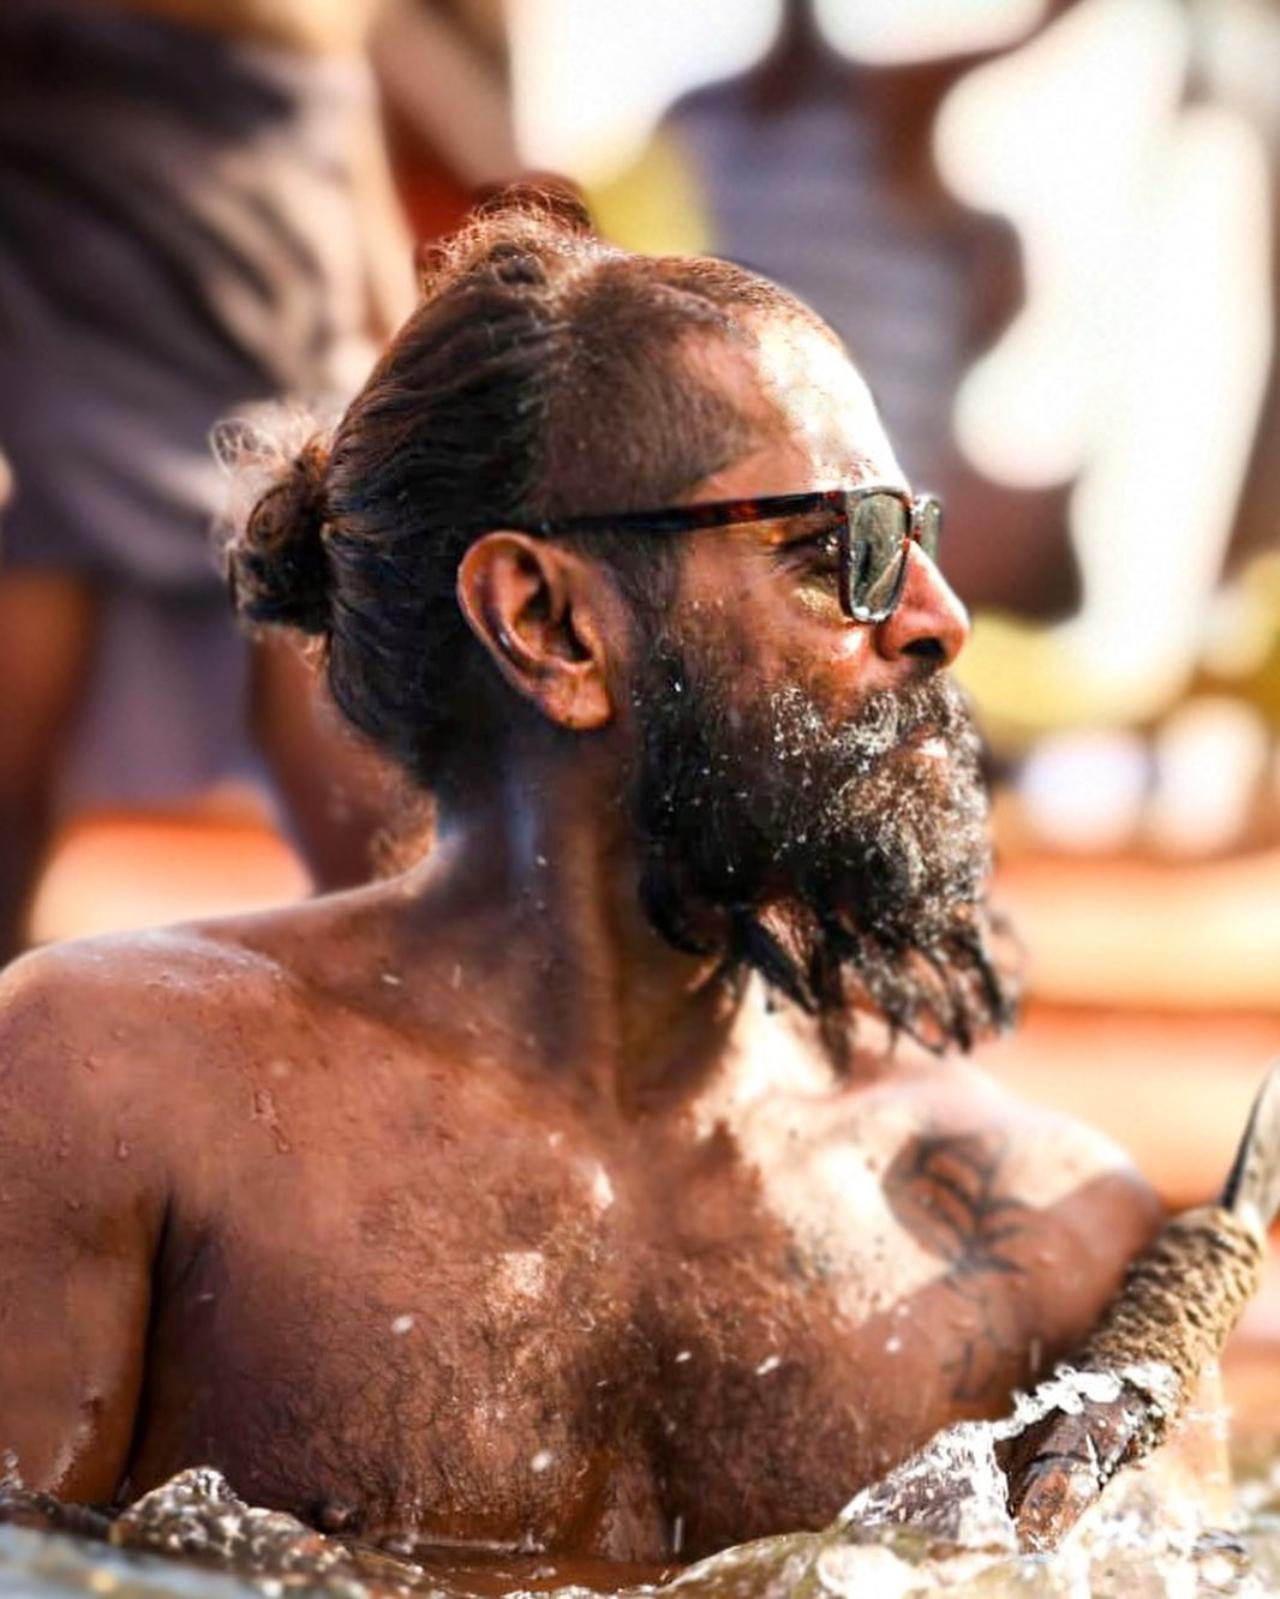 Chiyaan Vikram unveiled his look from Thangalaan some time ago, sending his fans into a frenzy. Sharing photos of his rugged look, he captioned the photos, 